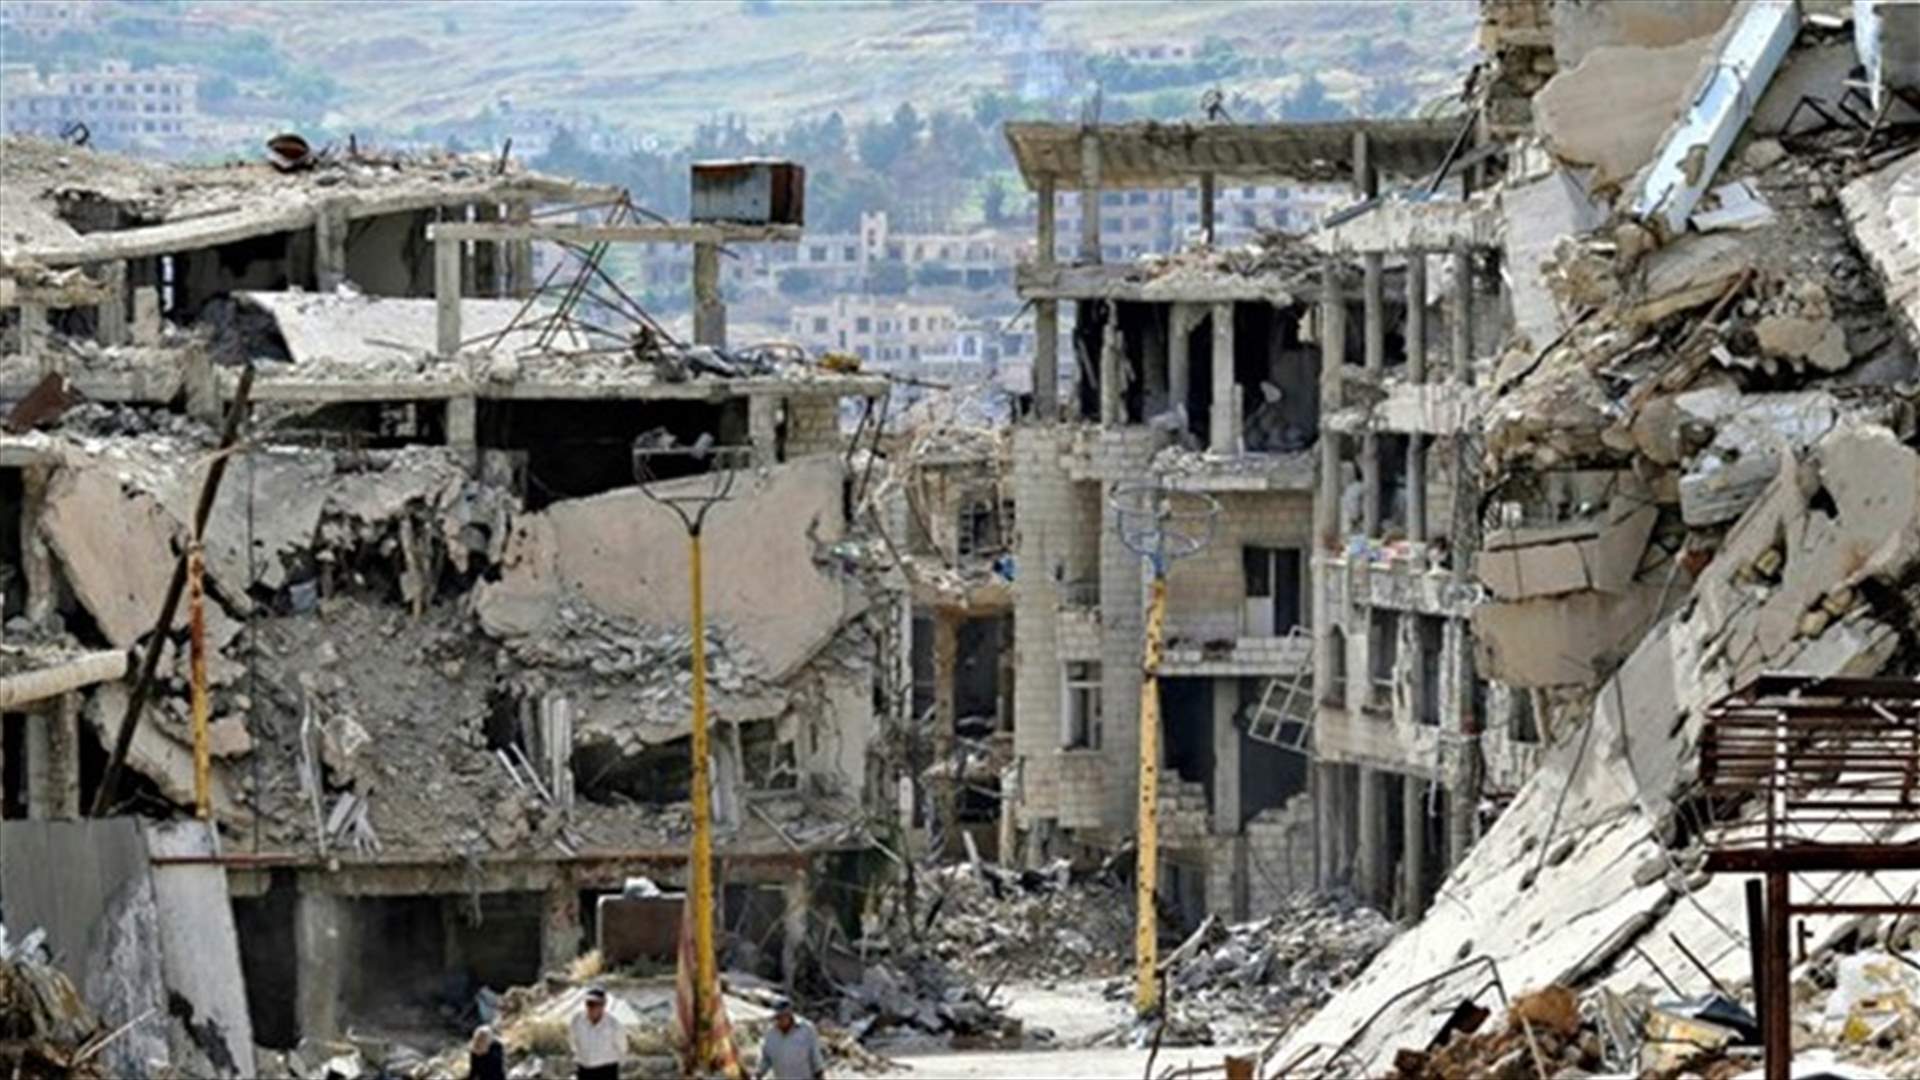 China says it will make efforts on Syria reconstruction